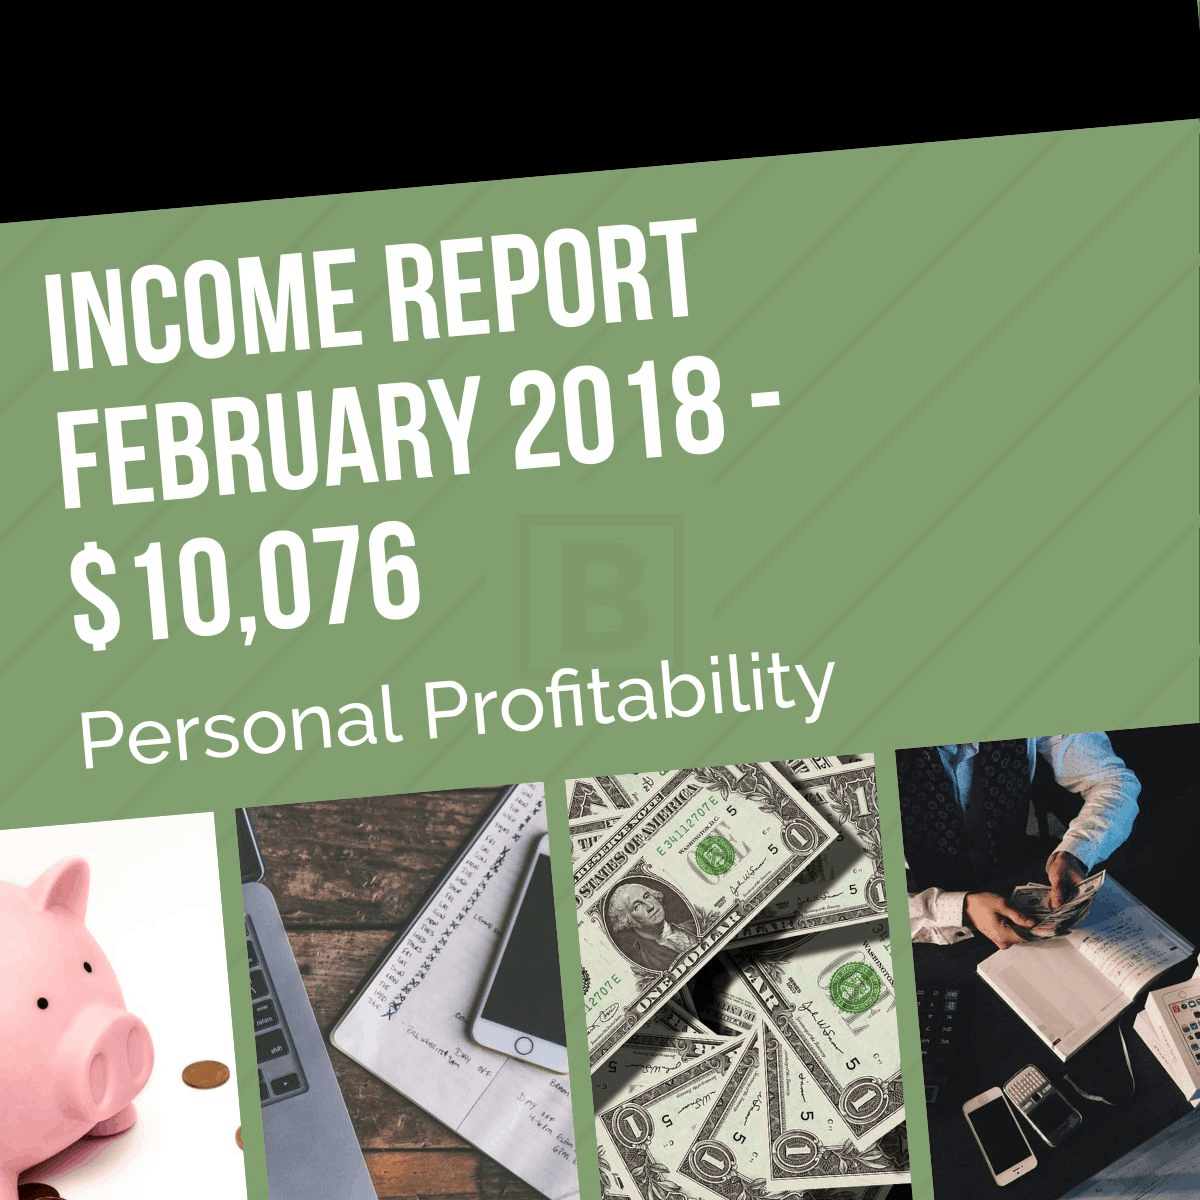 Here's how my income broke down in February, and a sneak peek of new projects I'm working on to keep the profitability train driving forward.